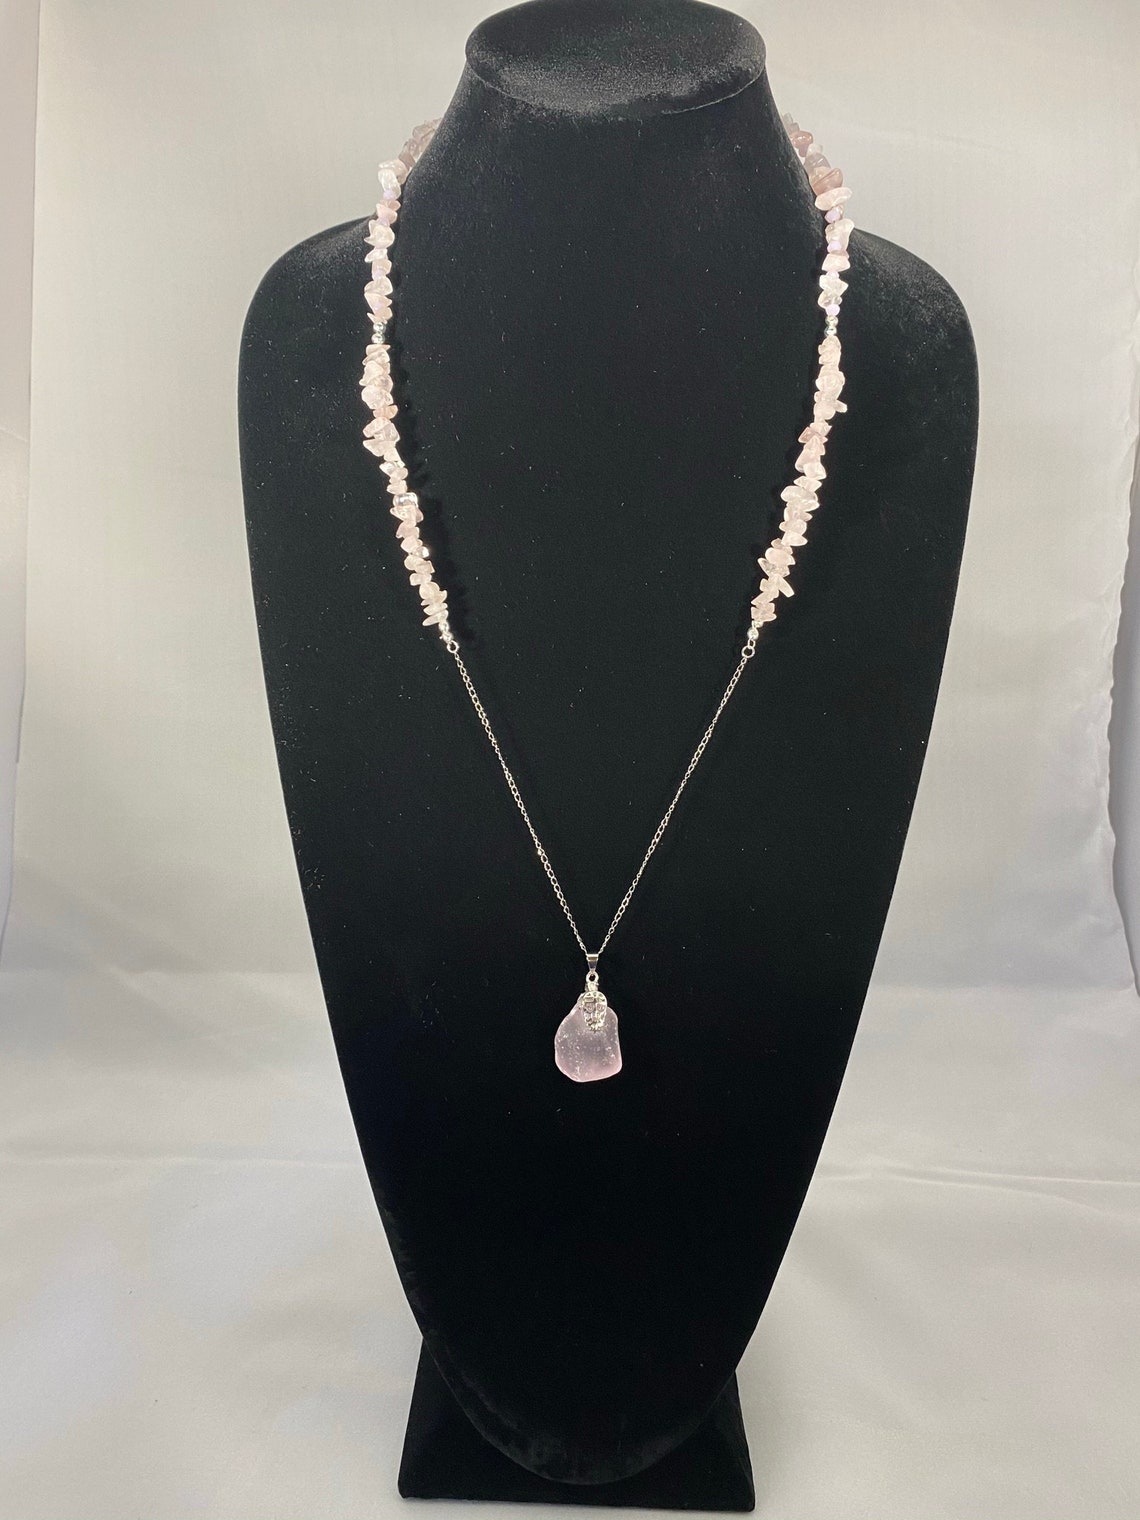 Pink Stone and Silver Necklace - Etsy